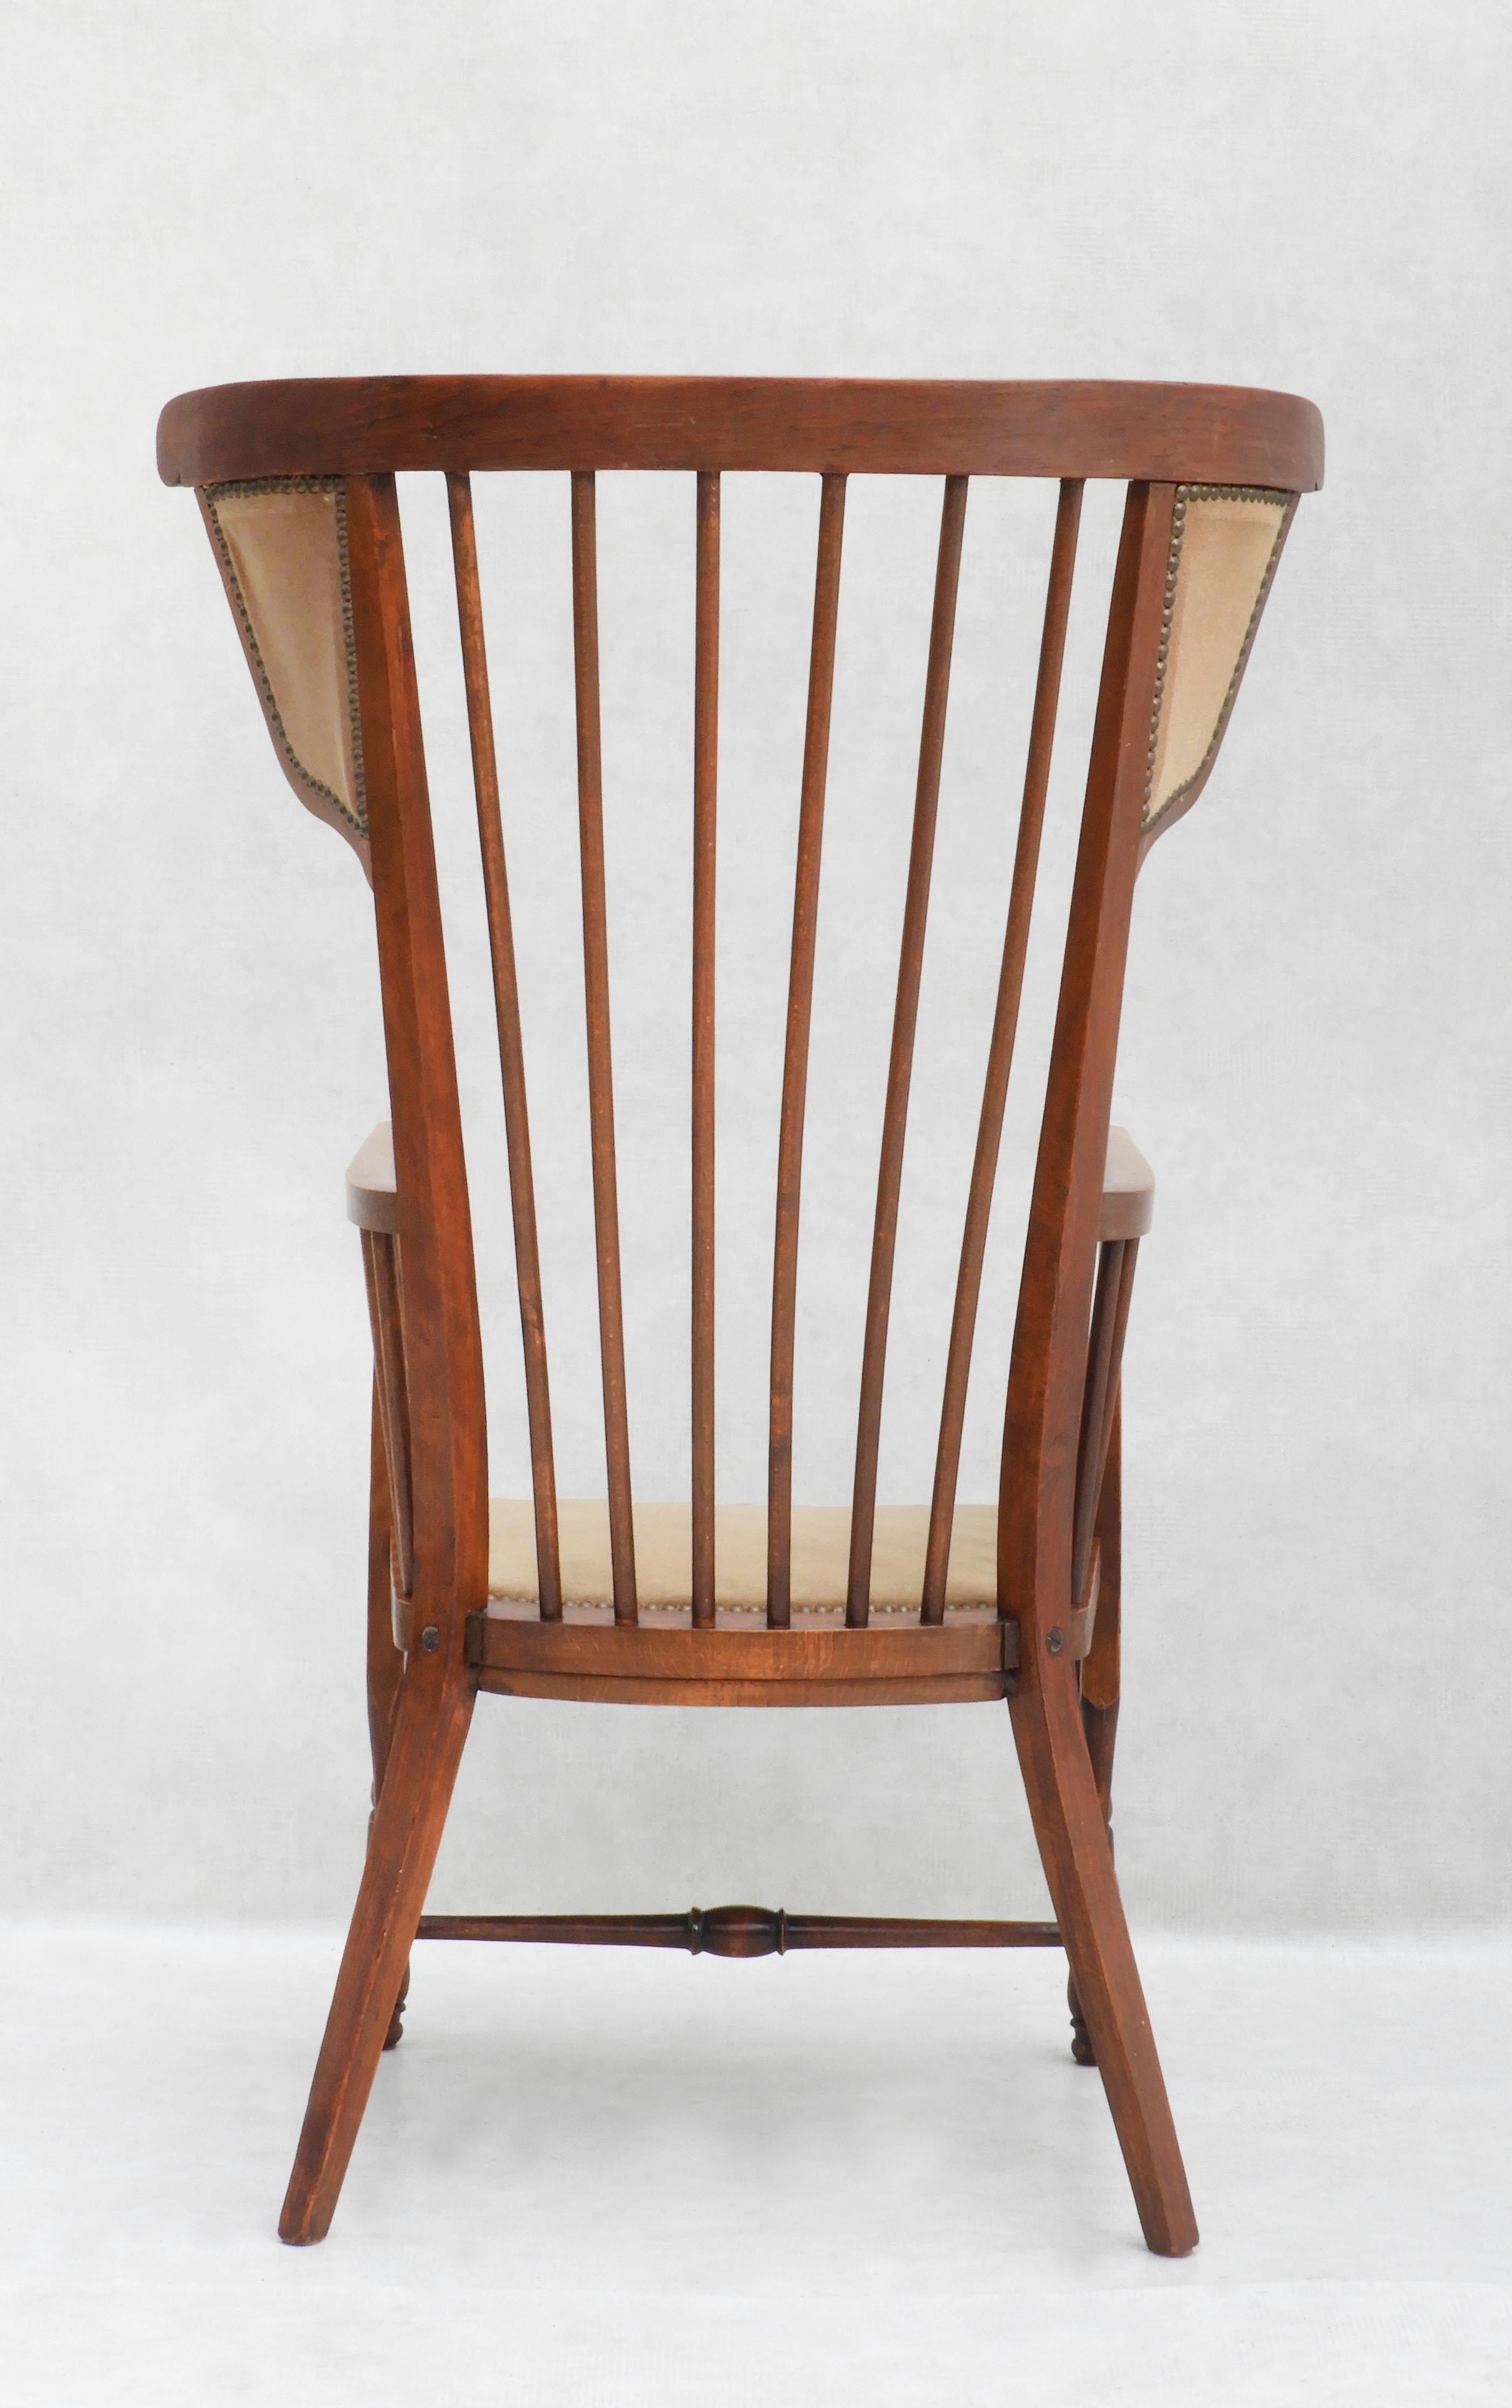 Beech Rare French Arts and Crafts High Back Spindle Wood Winged Upholstered Armchair  For Sale